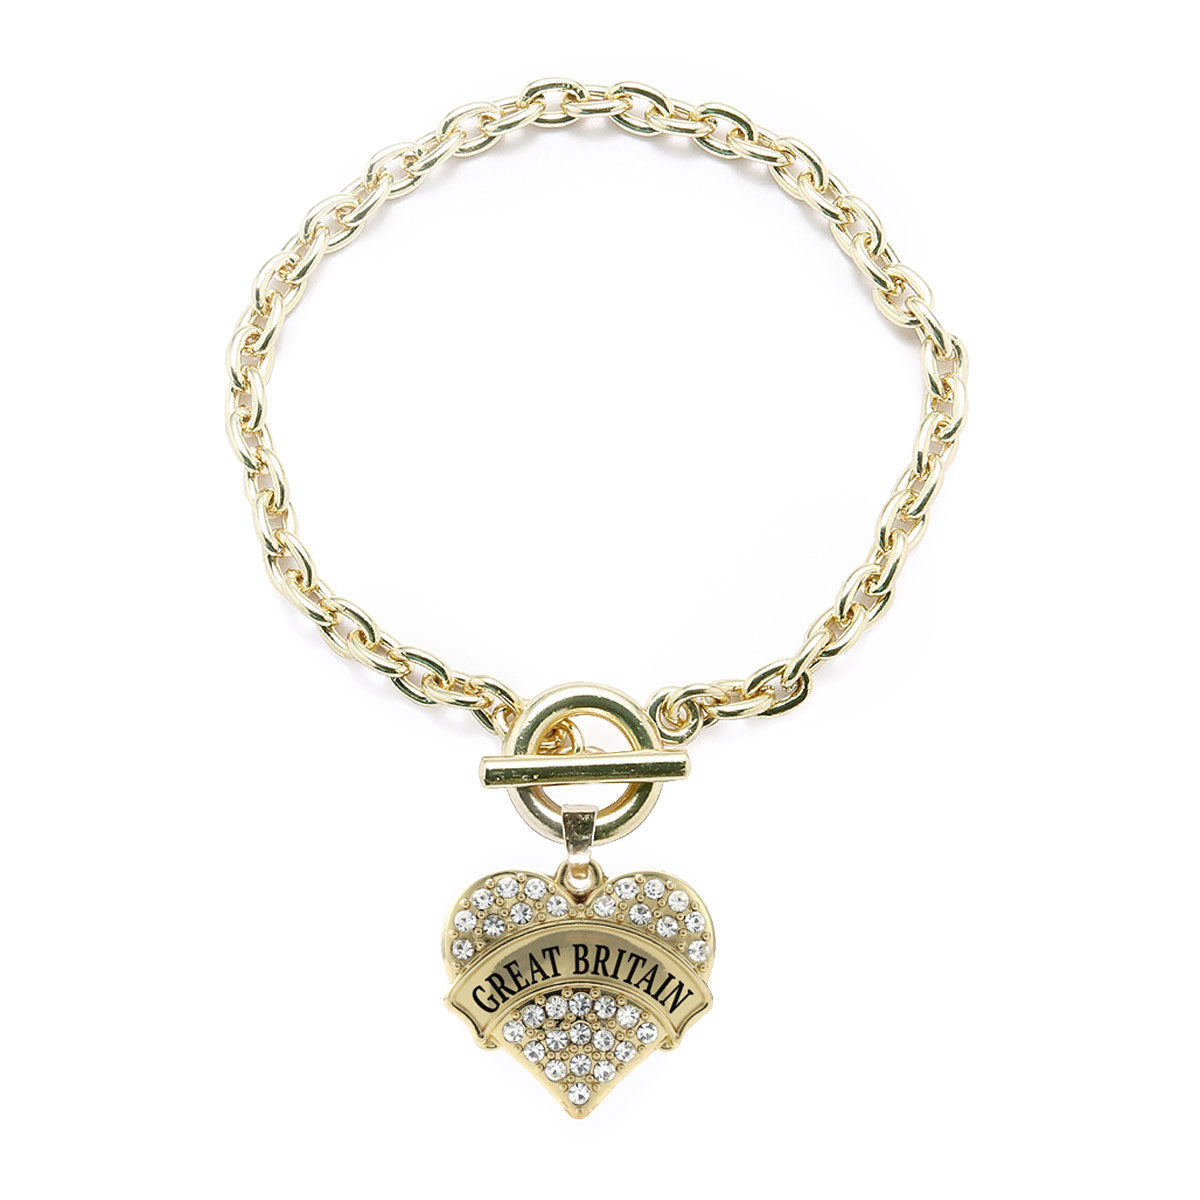 Gold Great Britain Pave Heart Charm Toggle Bracelet